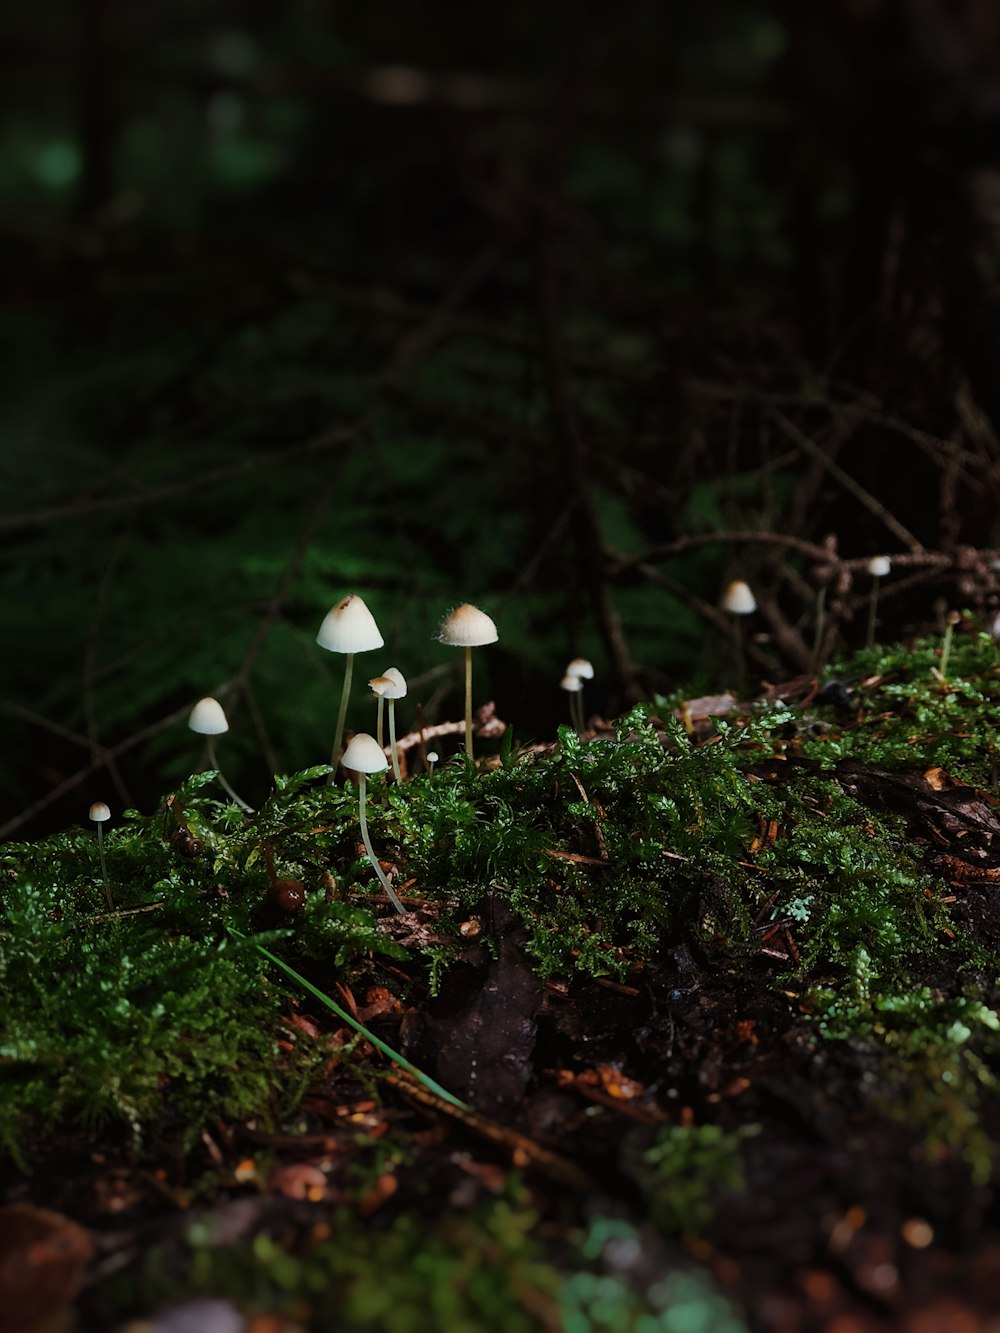 a group of small white mushrooms on a mossy ground